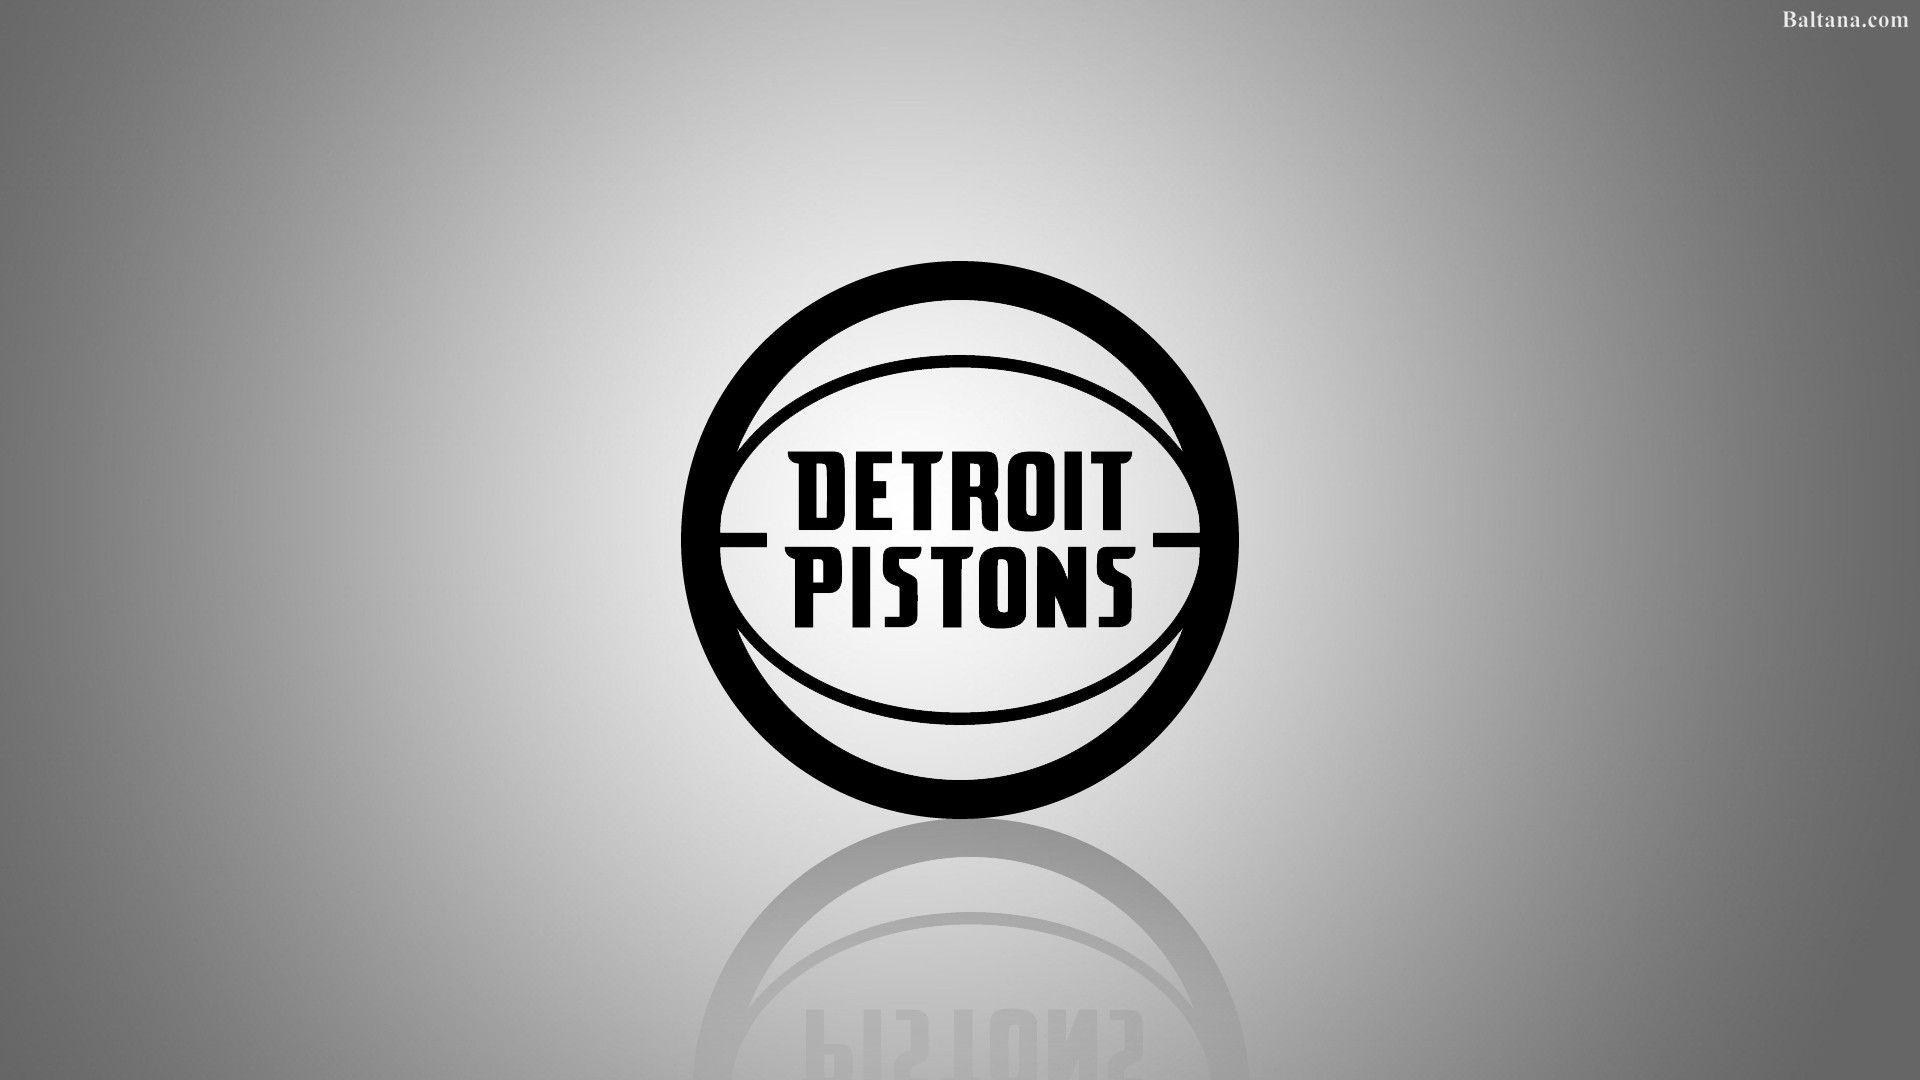 Detroit Pistons on Twitter  New week with some fresh wallpaper  RT to  wish the state of Michigan a happy birthday Pistons  WallpaperWednesday  httpstcodqmHLKs2K5  Twitter